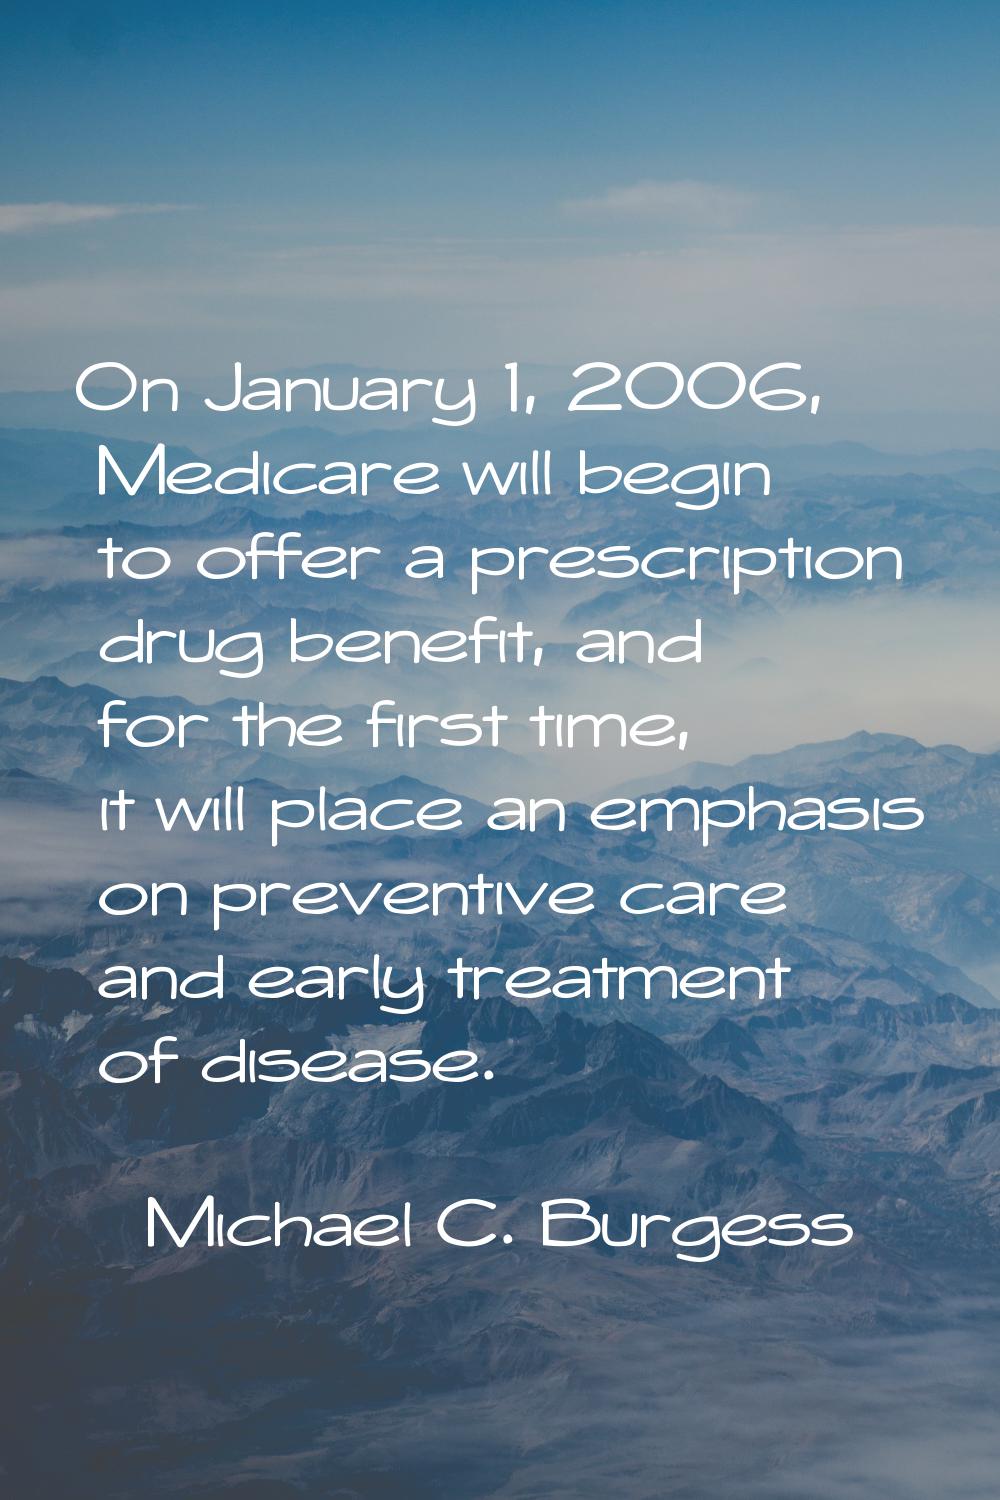 On January 1, 2006, Medicare will begin to offer a prescription drug benefit, and for the first tim